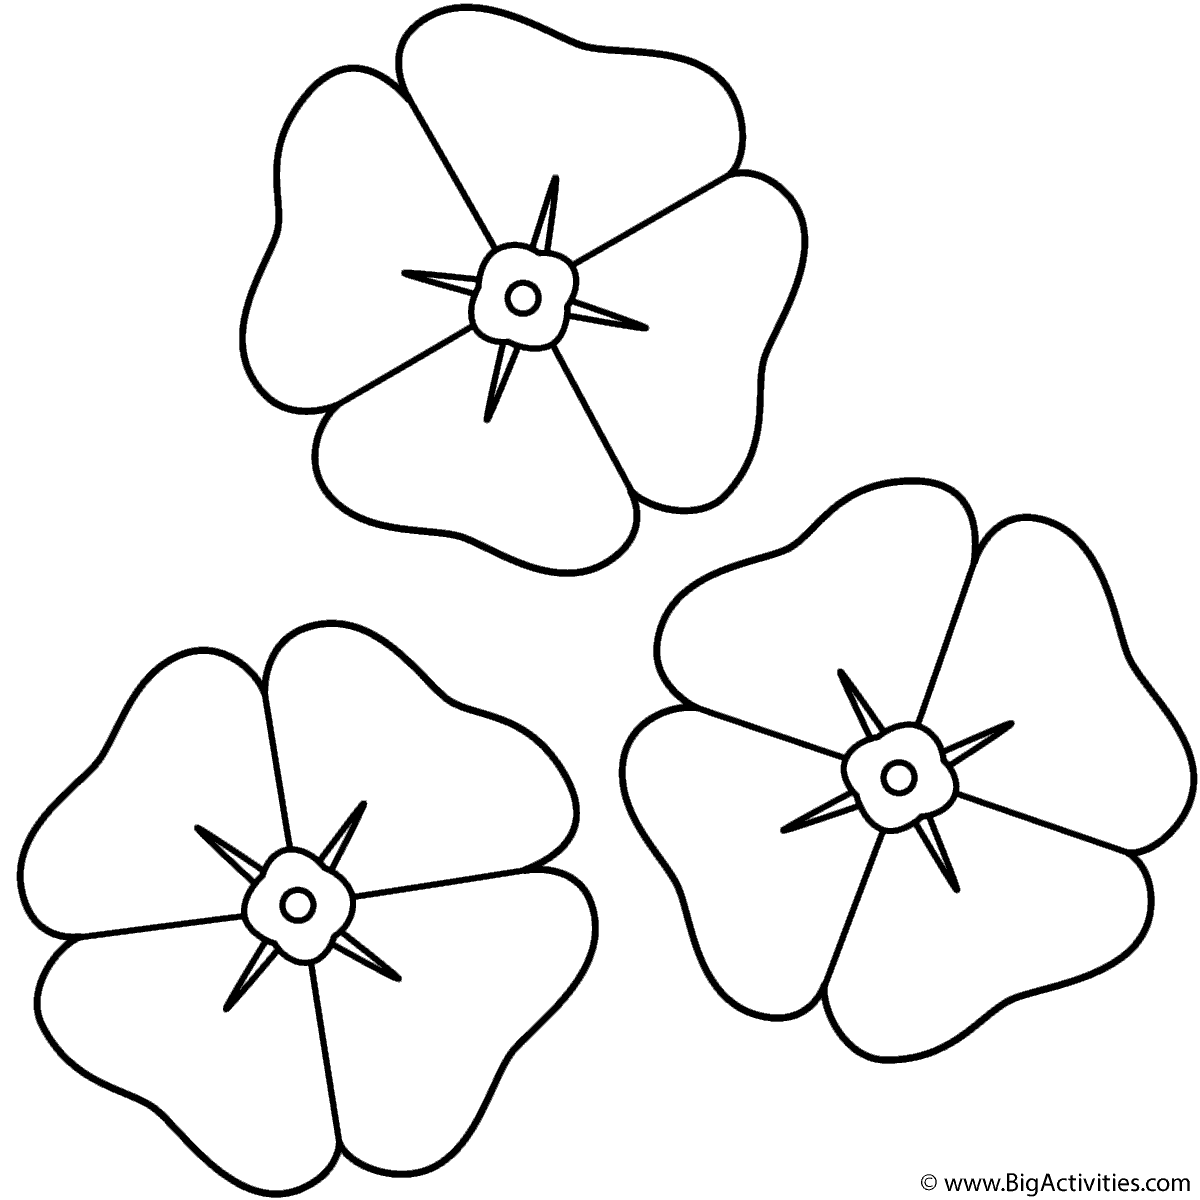 poppies-coloring-page-memorial-day